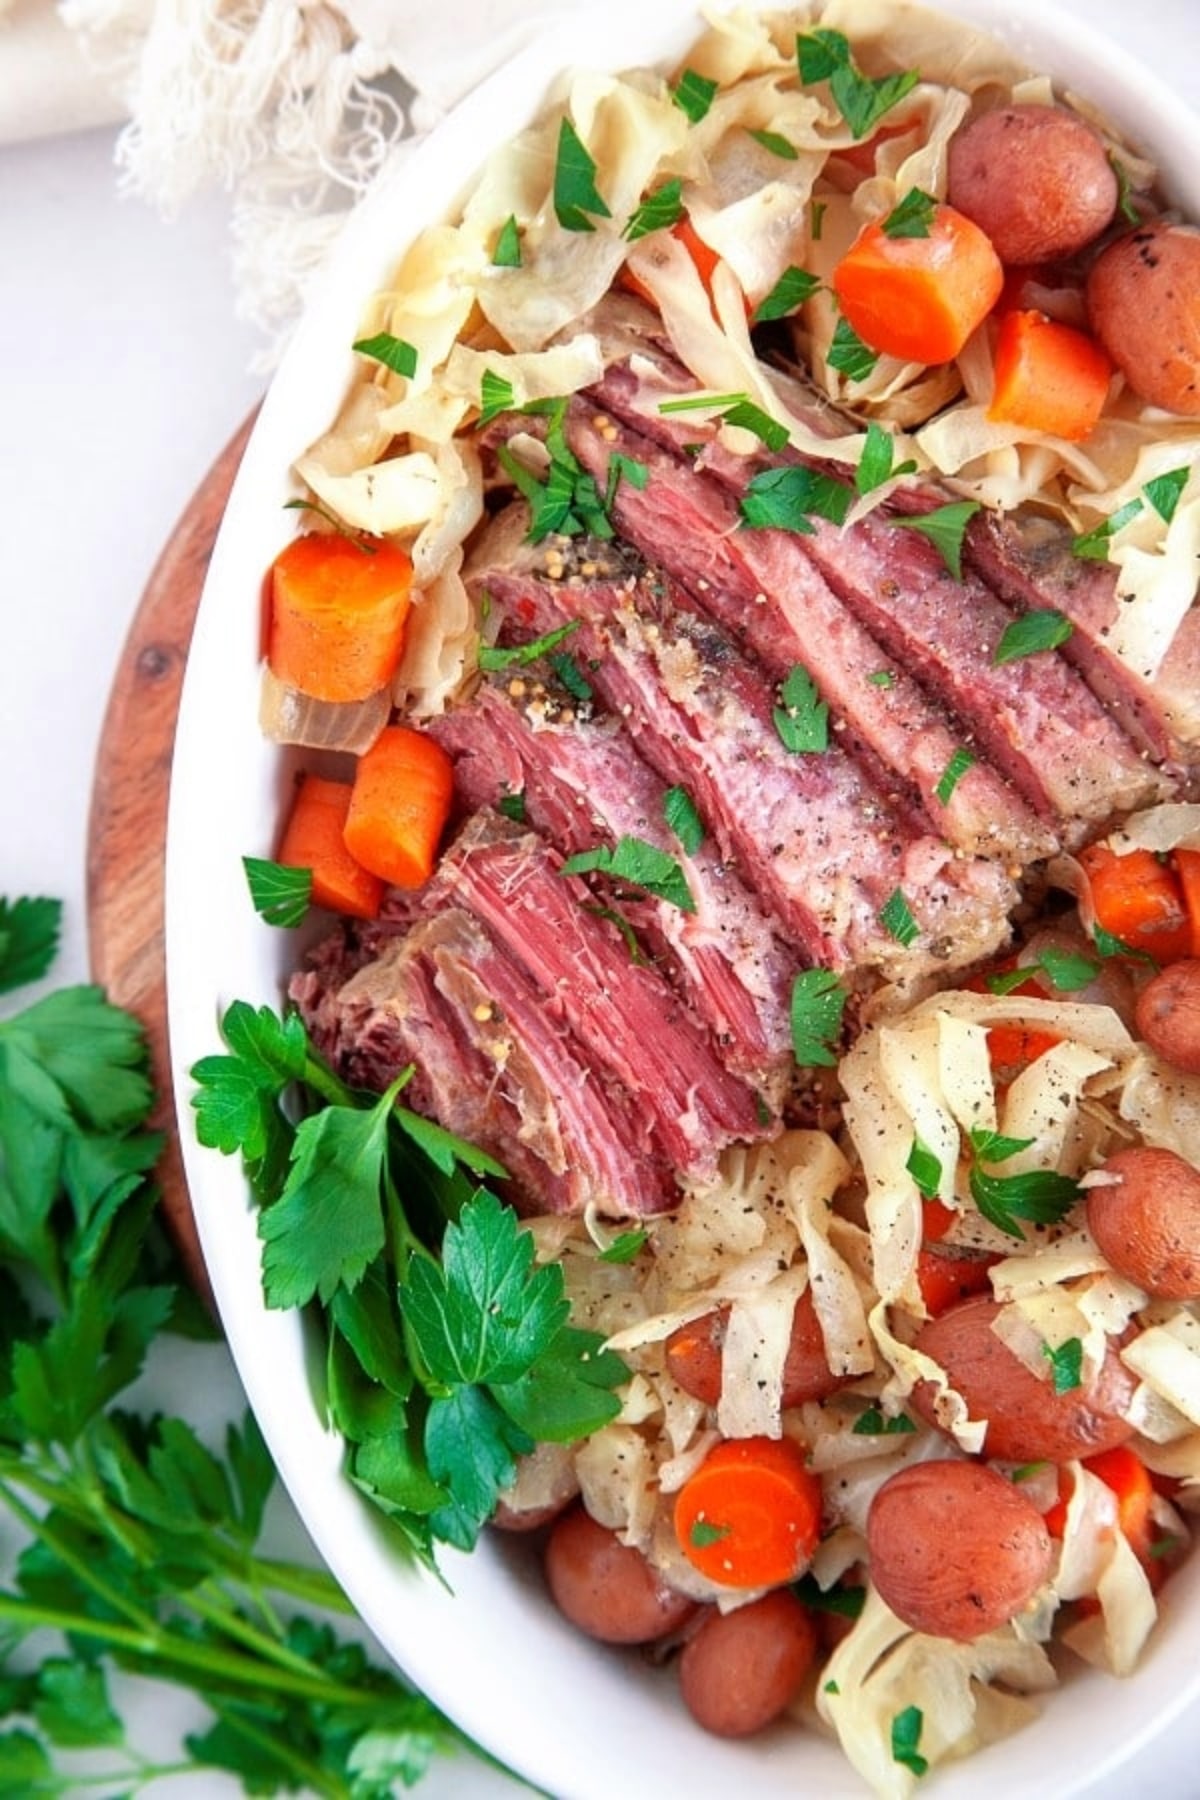 Slow Cooker Corned Beef and Cabbage served with vegetables.